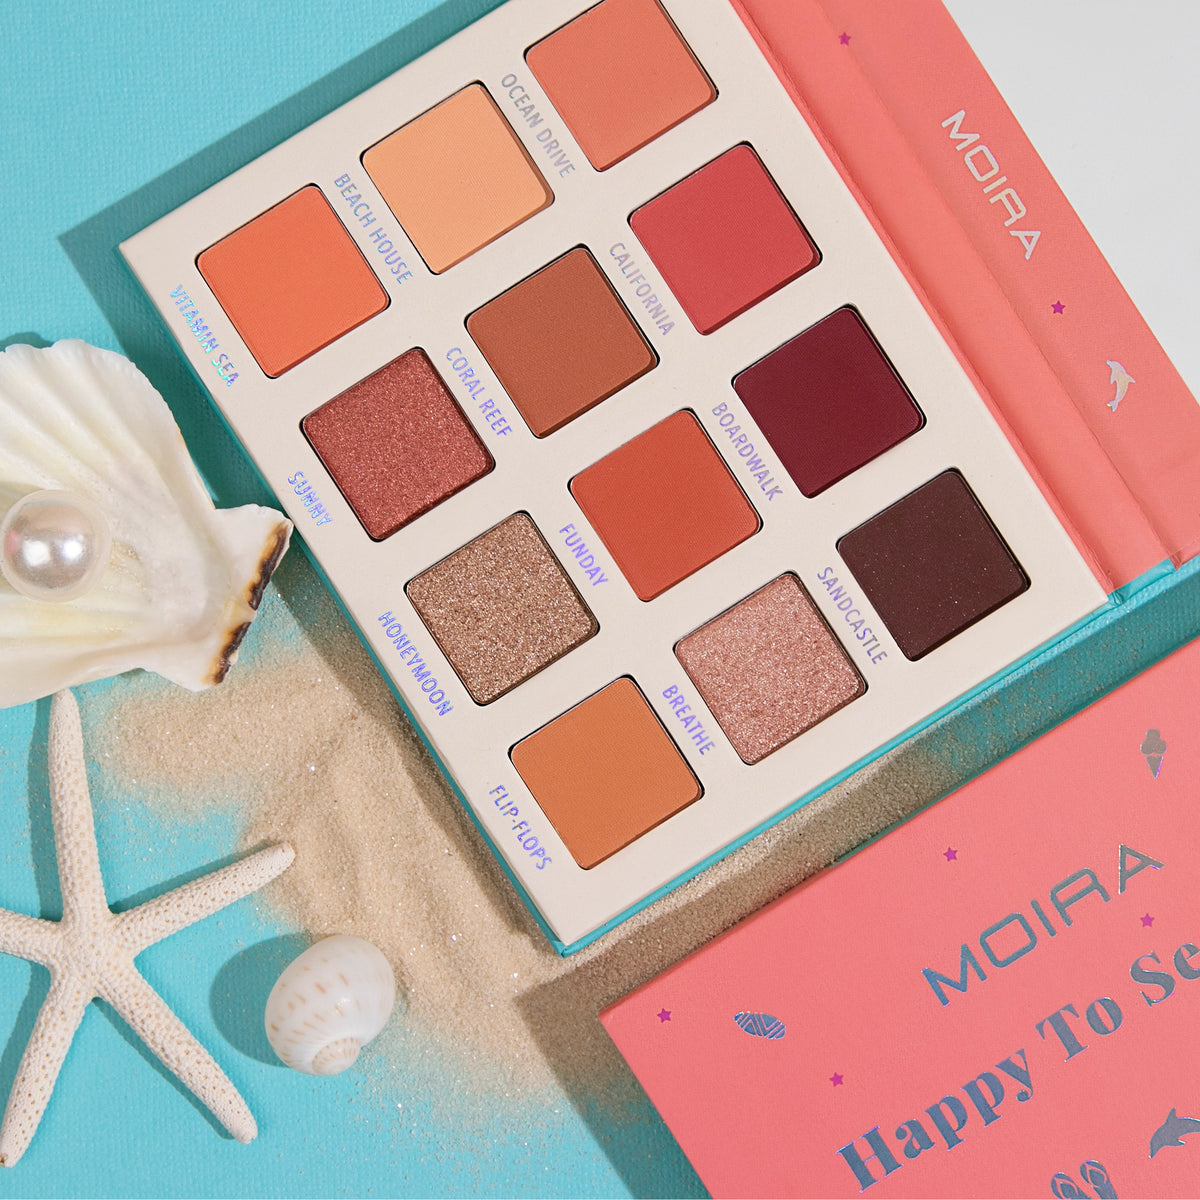 Moira Weekend Vibes Shadow Palette - 001 Happy to Sea You - Totality Medispa and Skincare